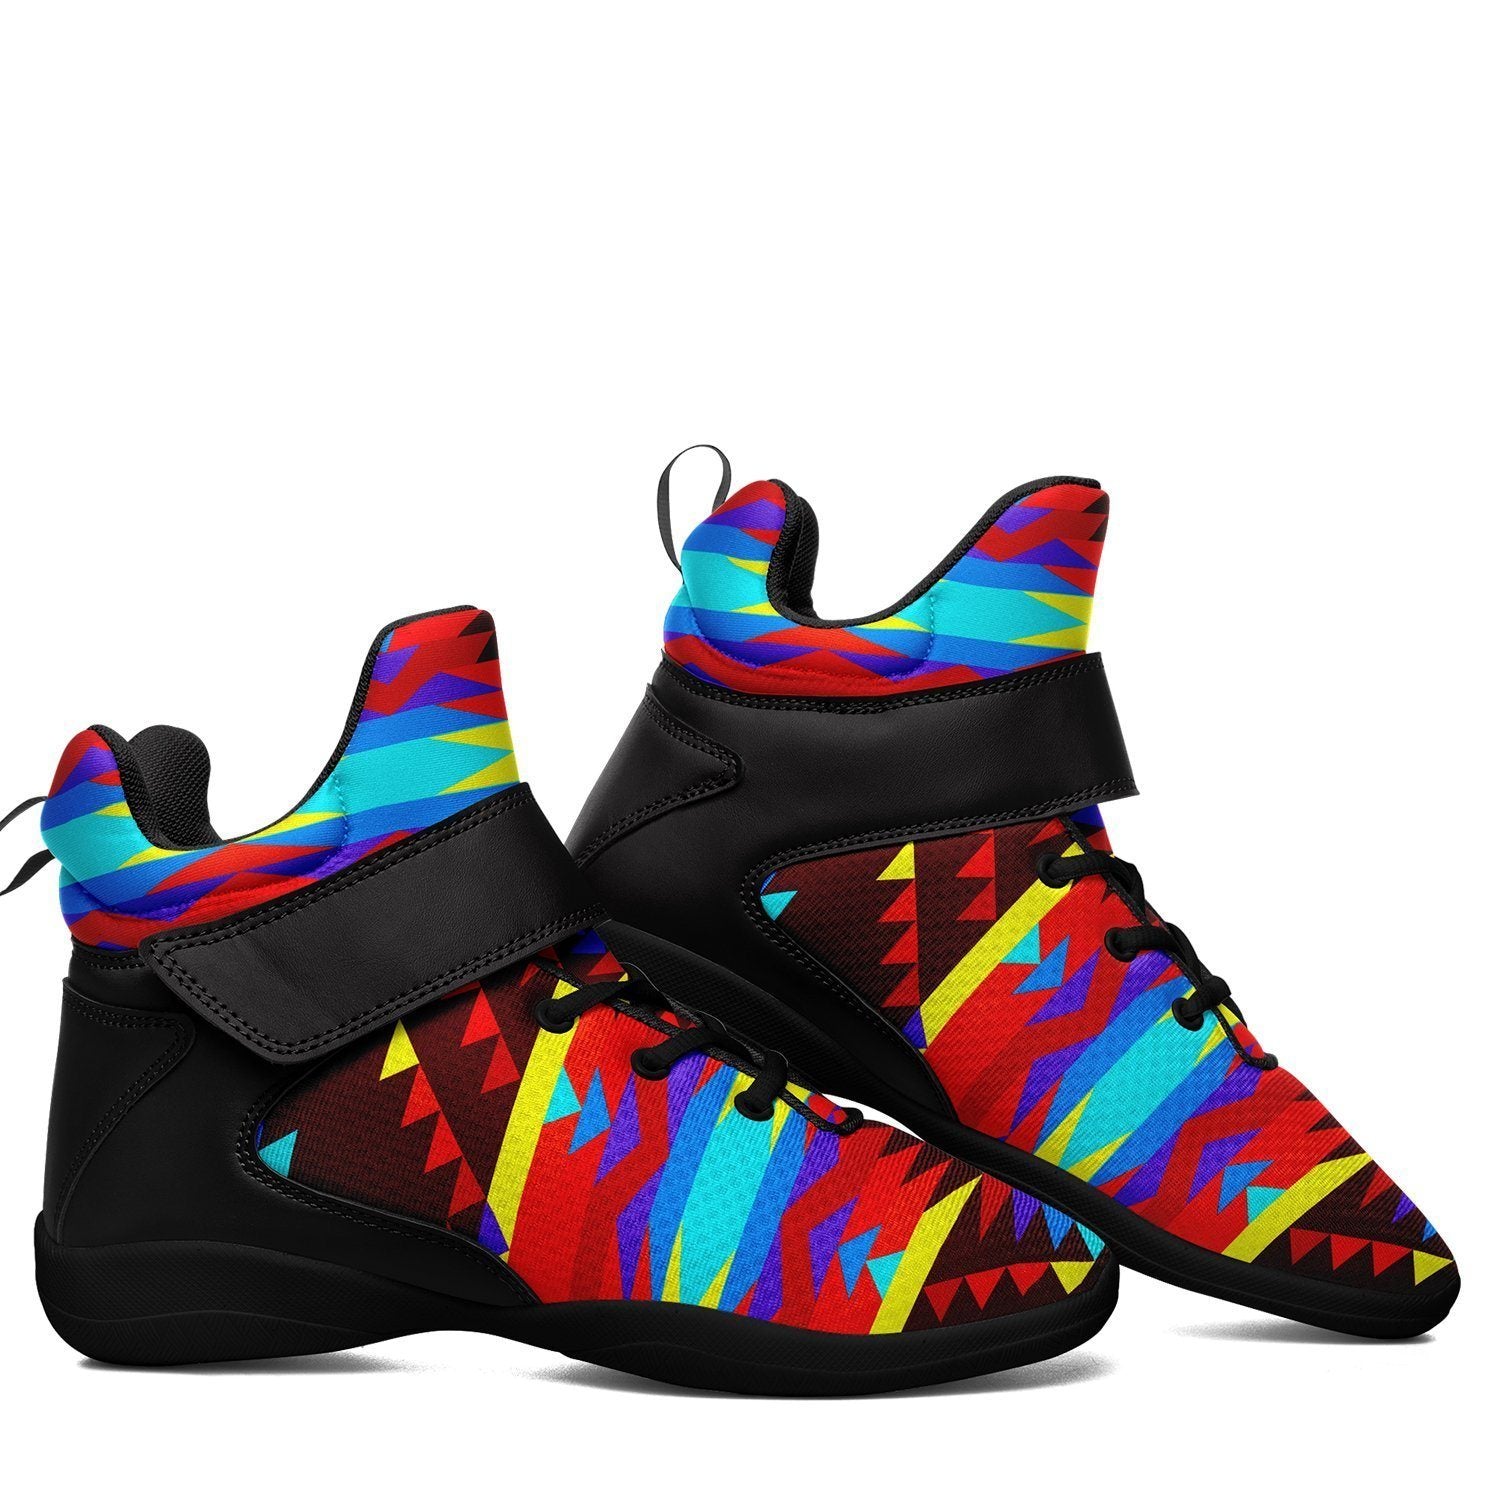 Visions of Lasting Peace Ipottaa Basketball / Sport High Top Shoes -Black Sole 49 Dzine 